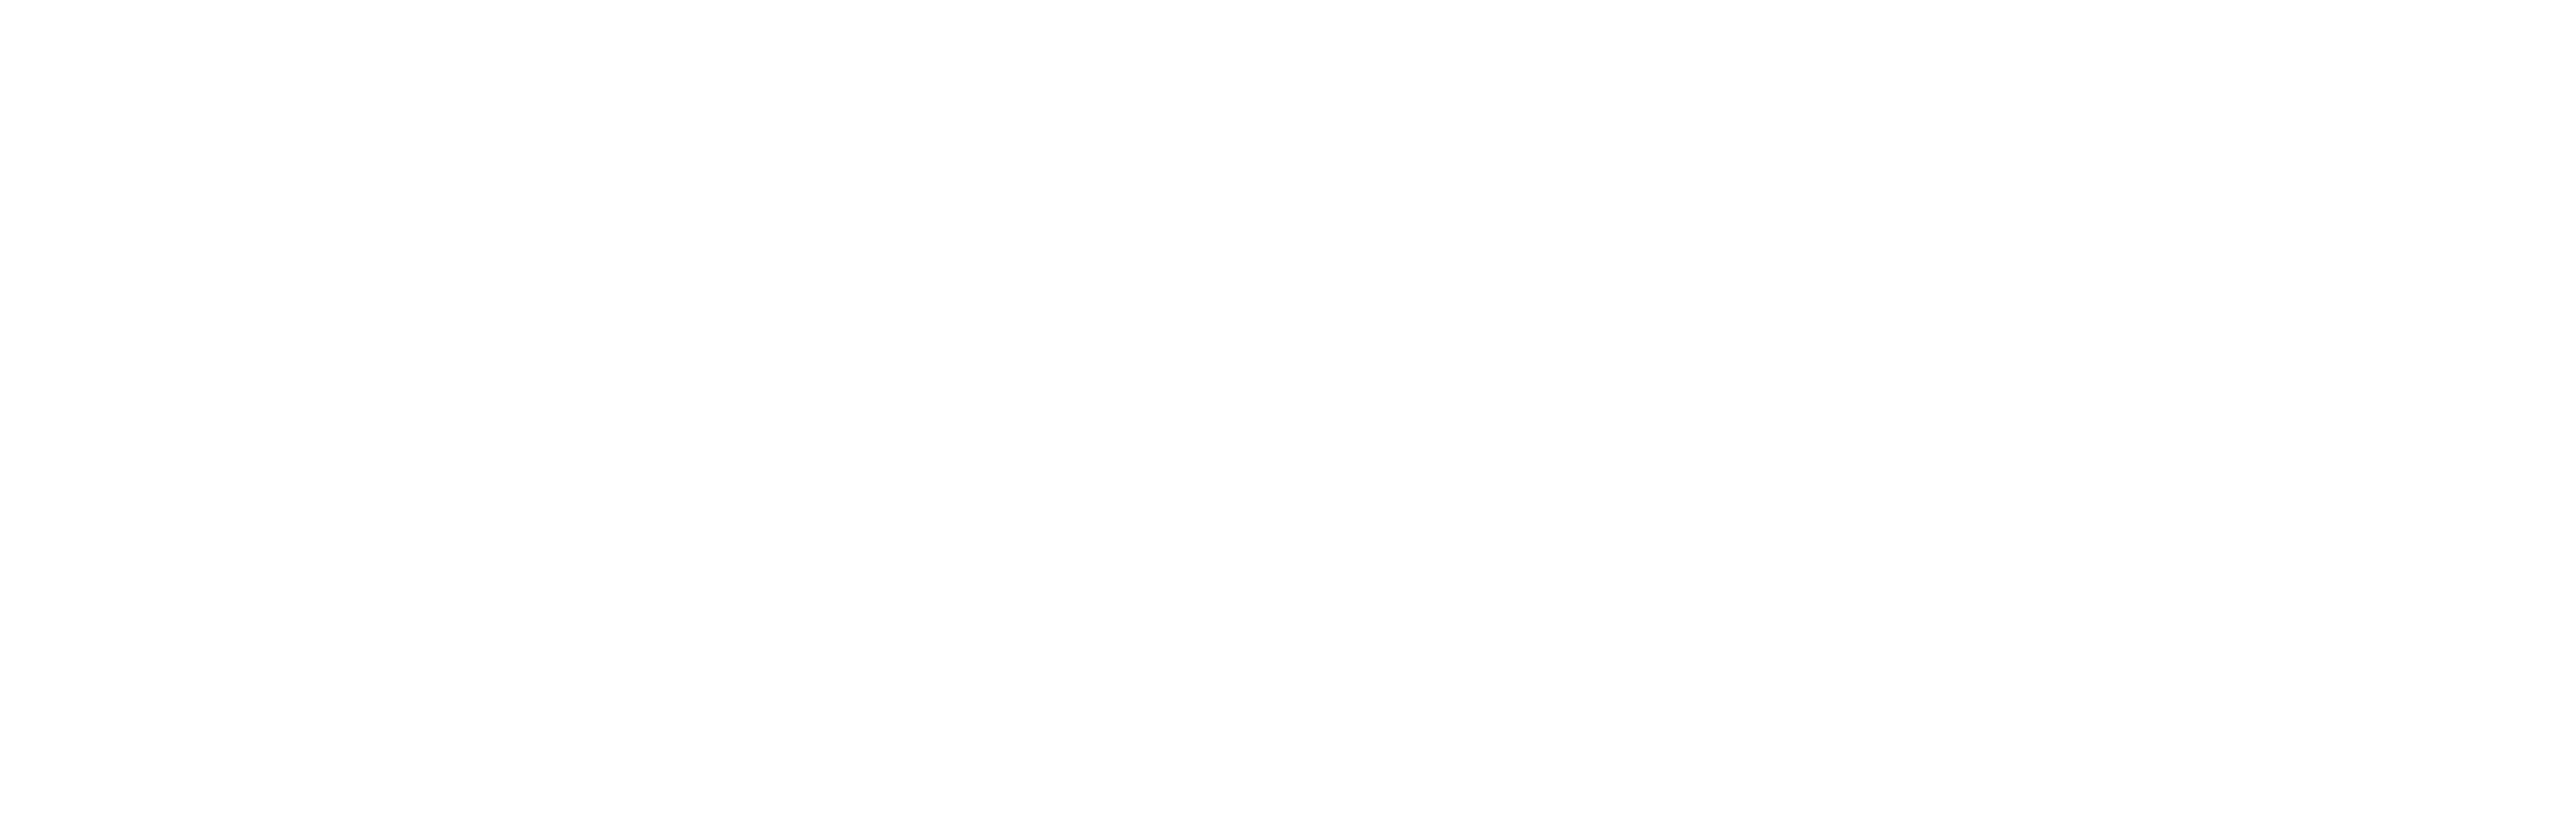 The logo for The Courtyards at Linden Pointe in Winnipeg, Manitoba